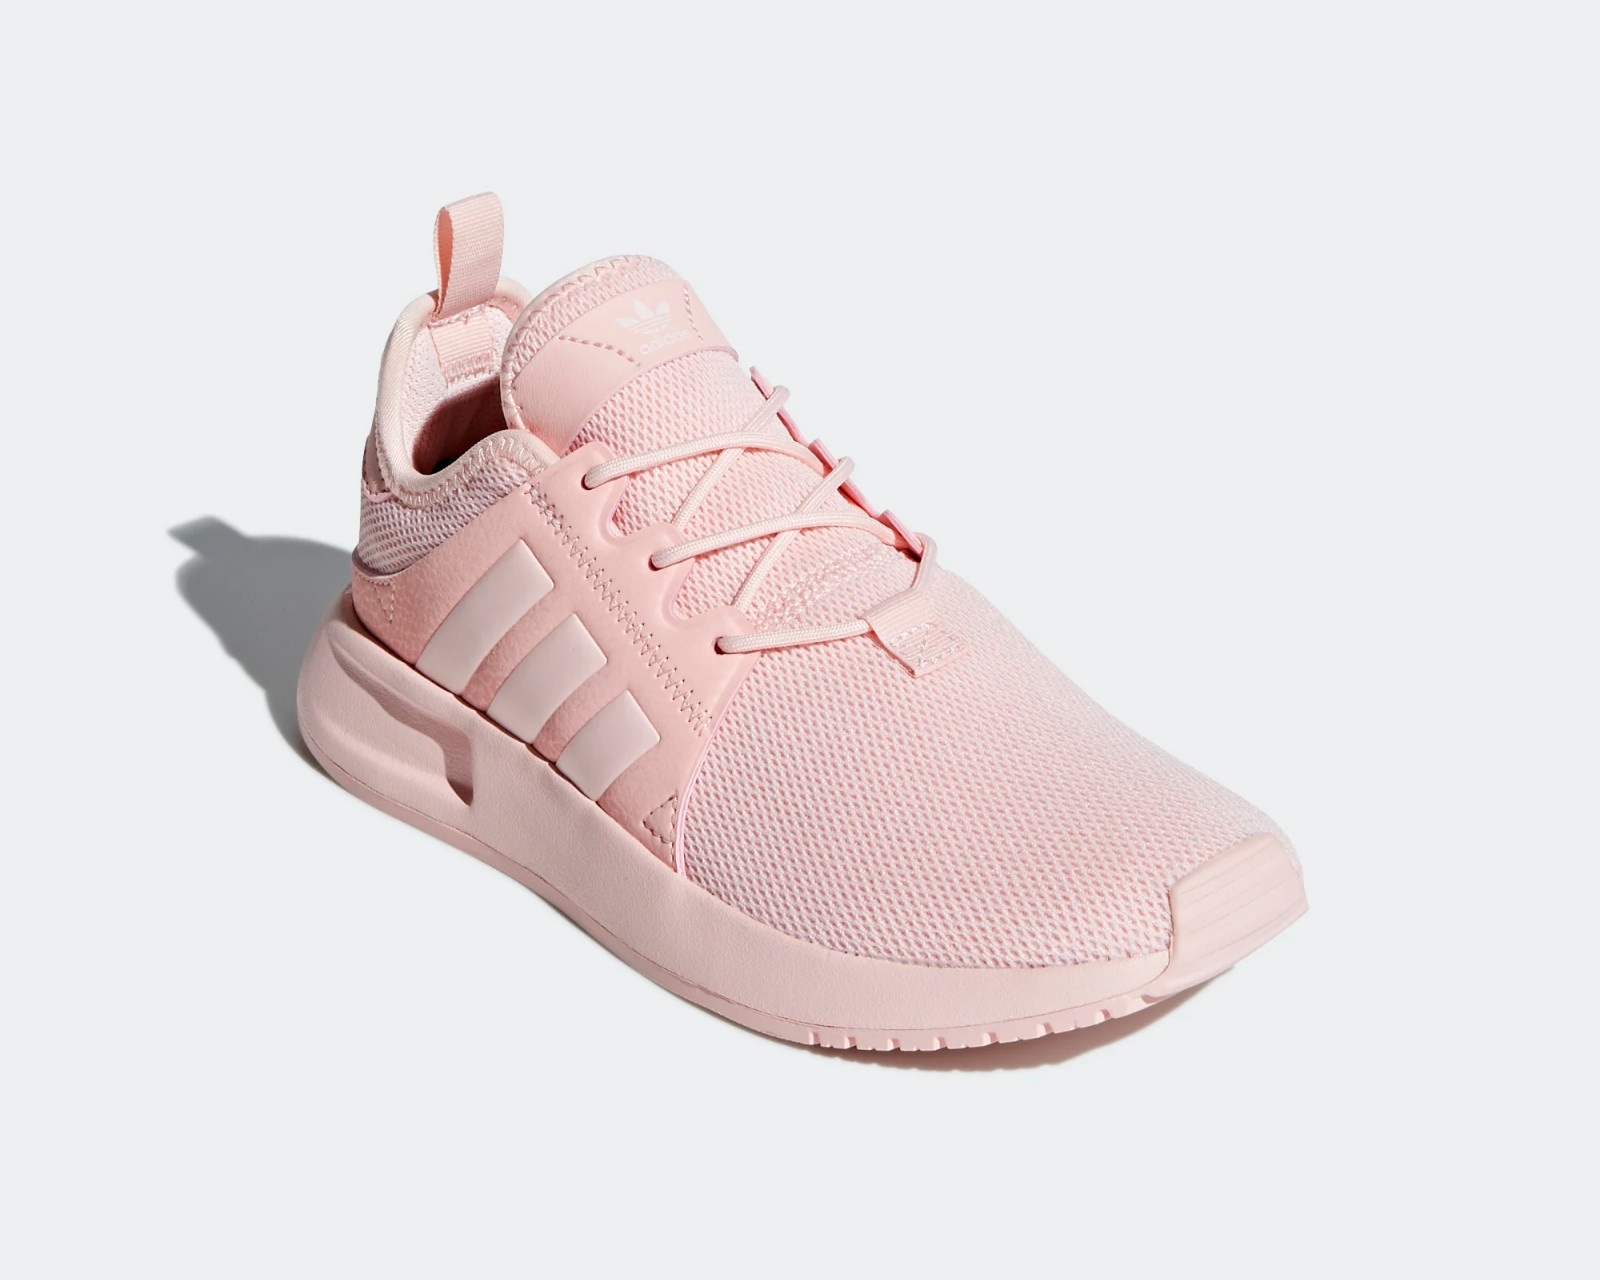 Adidas X PLR Icey Pink Icey Pink Icey Pink Running Shoes BY9880 - Febbuy